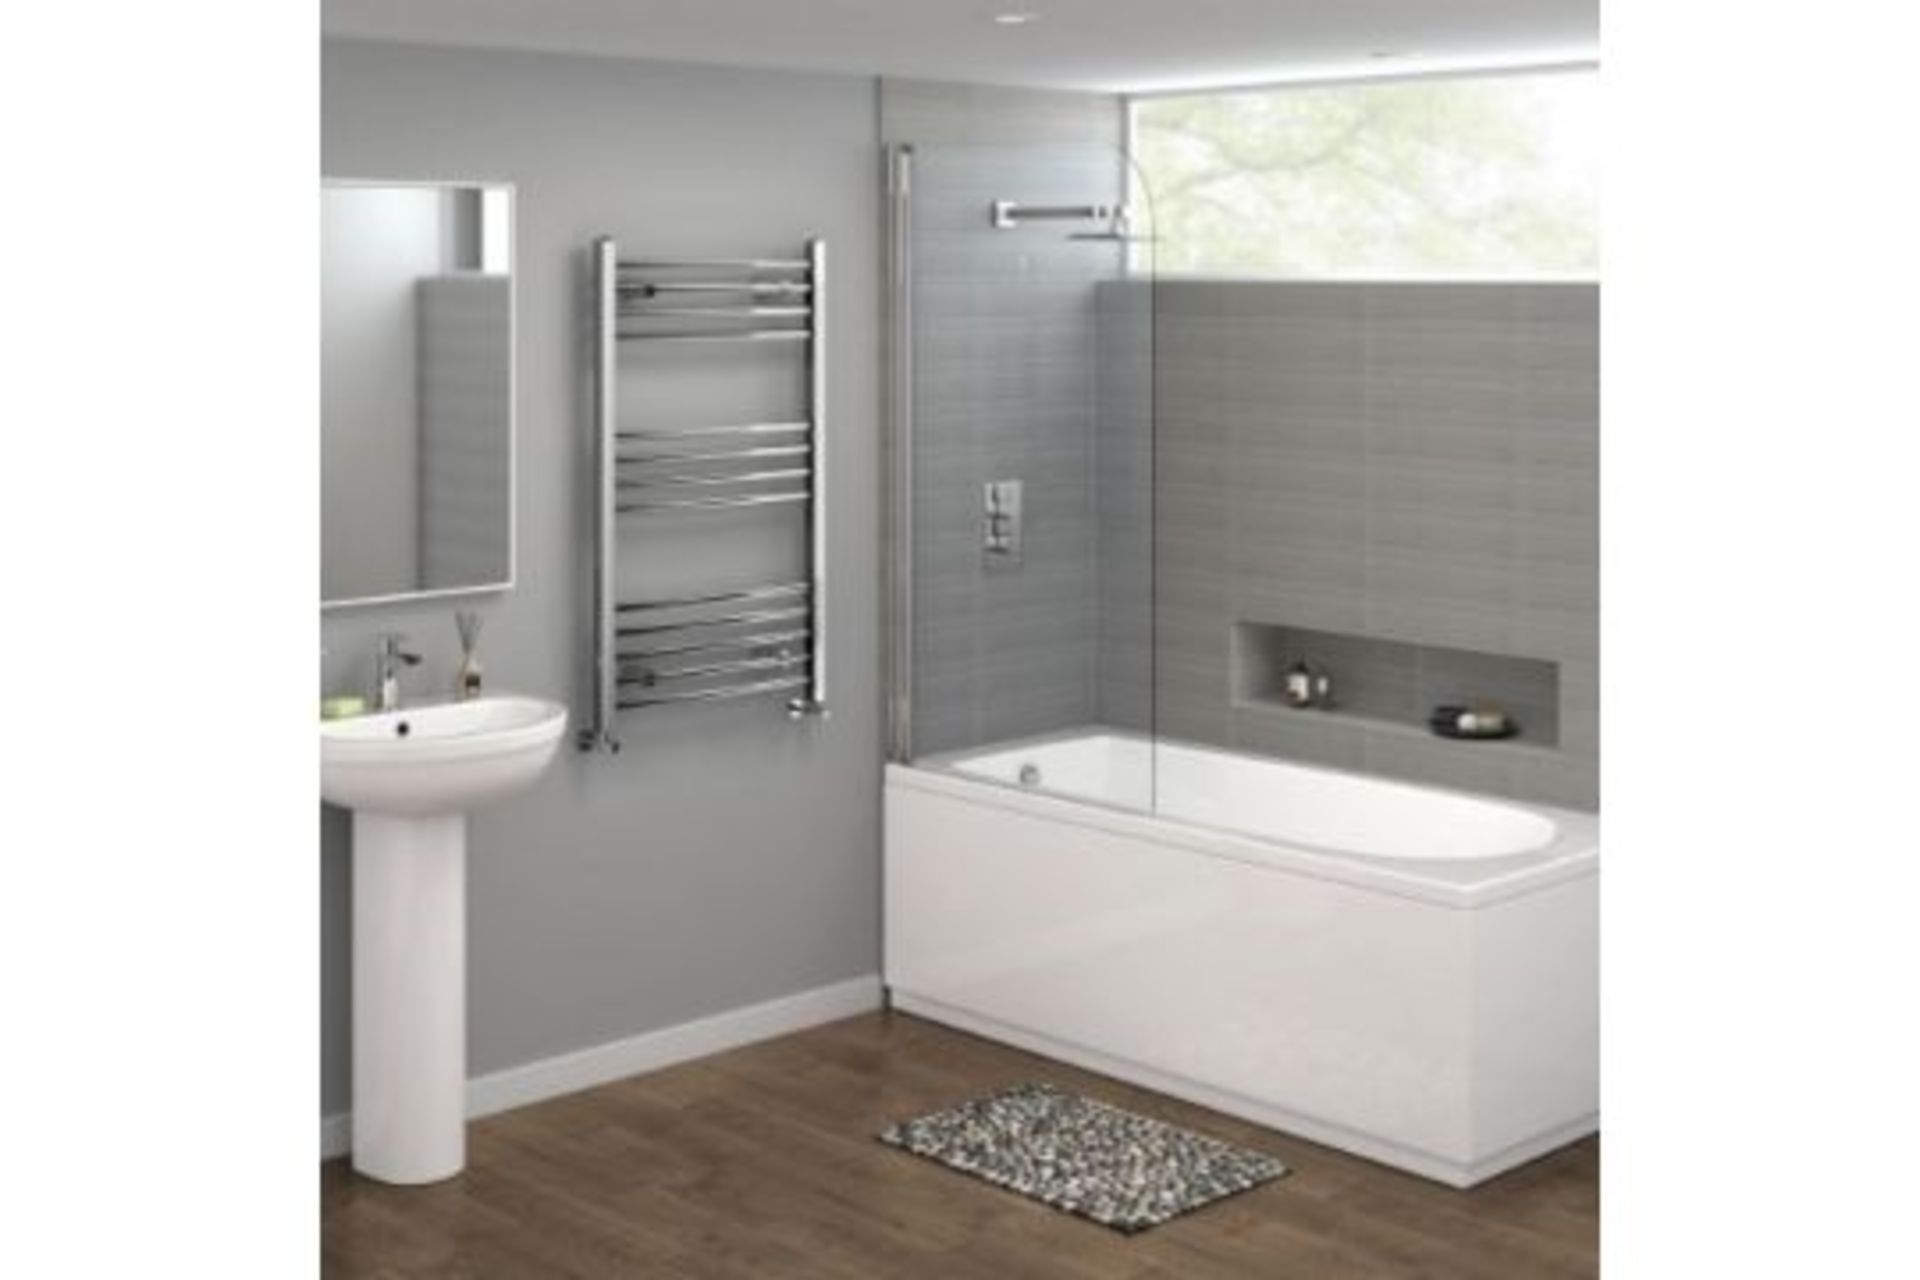 NEW & BOXED 1200x600mm - 20mm Tubes - RRP £219.99.Chrome Curved Rail Ladder Towel Radiator.Our... - Image 2 of 2